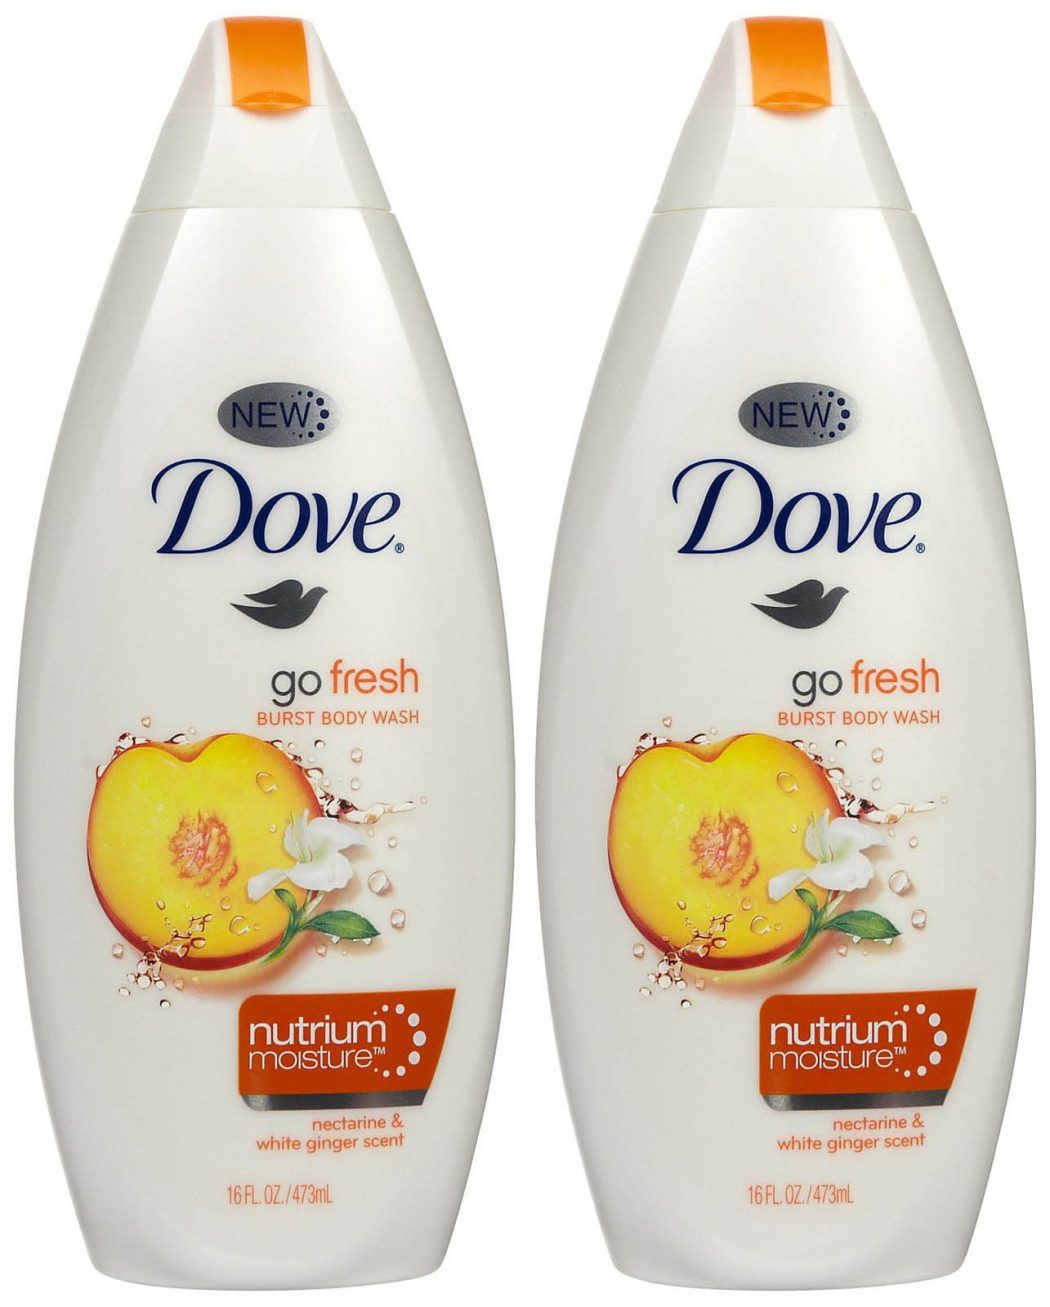 Dove-Body-Wash5 6 Best-Selling Women's Beauty Products in 2020